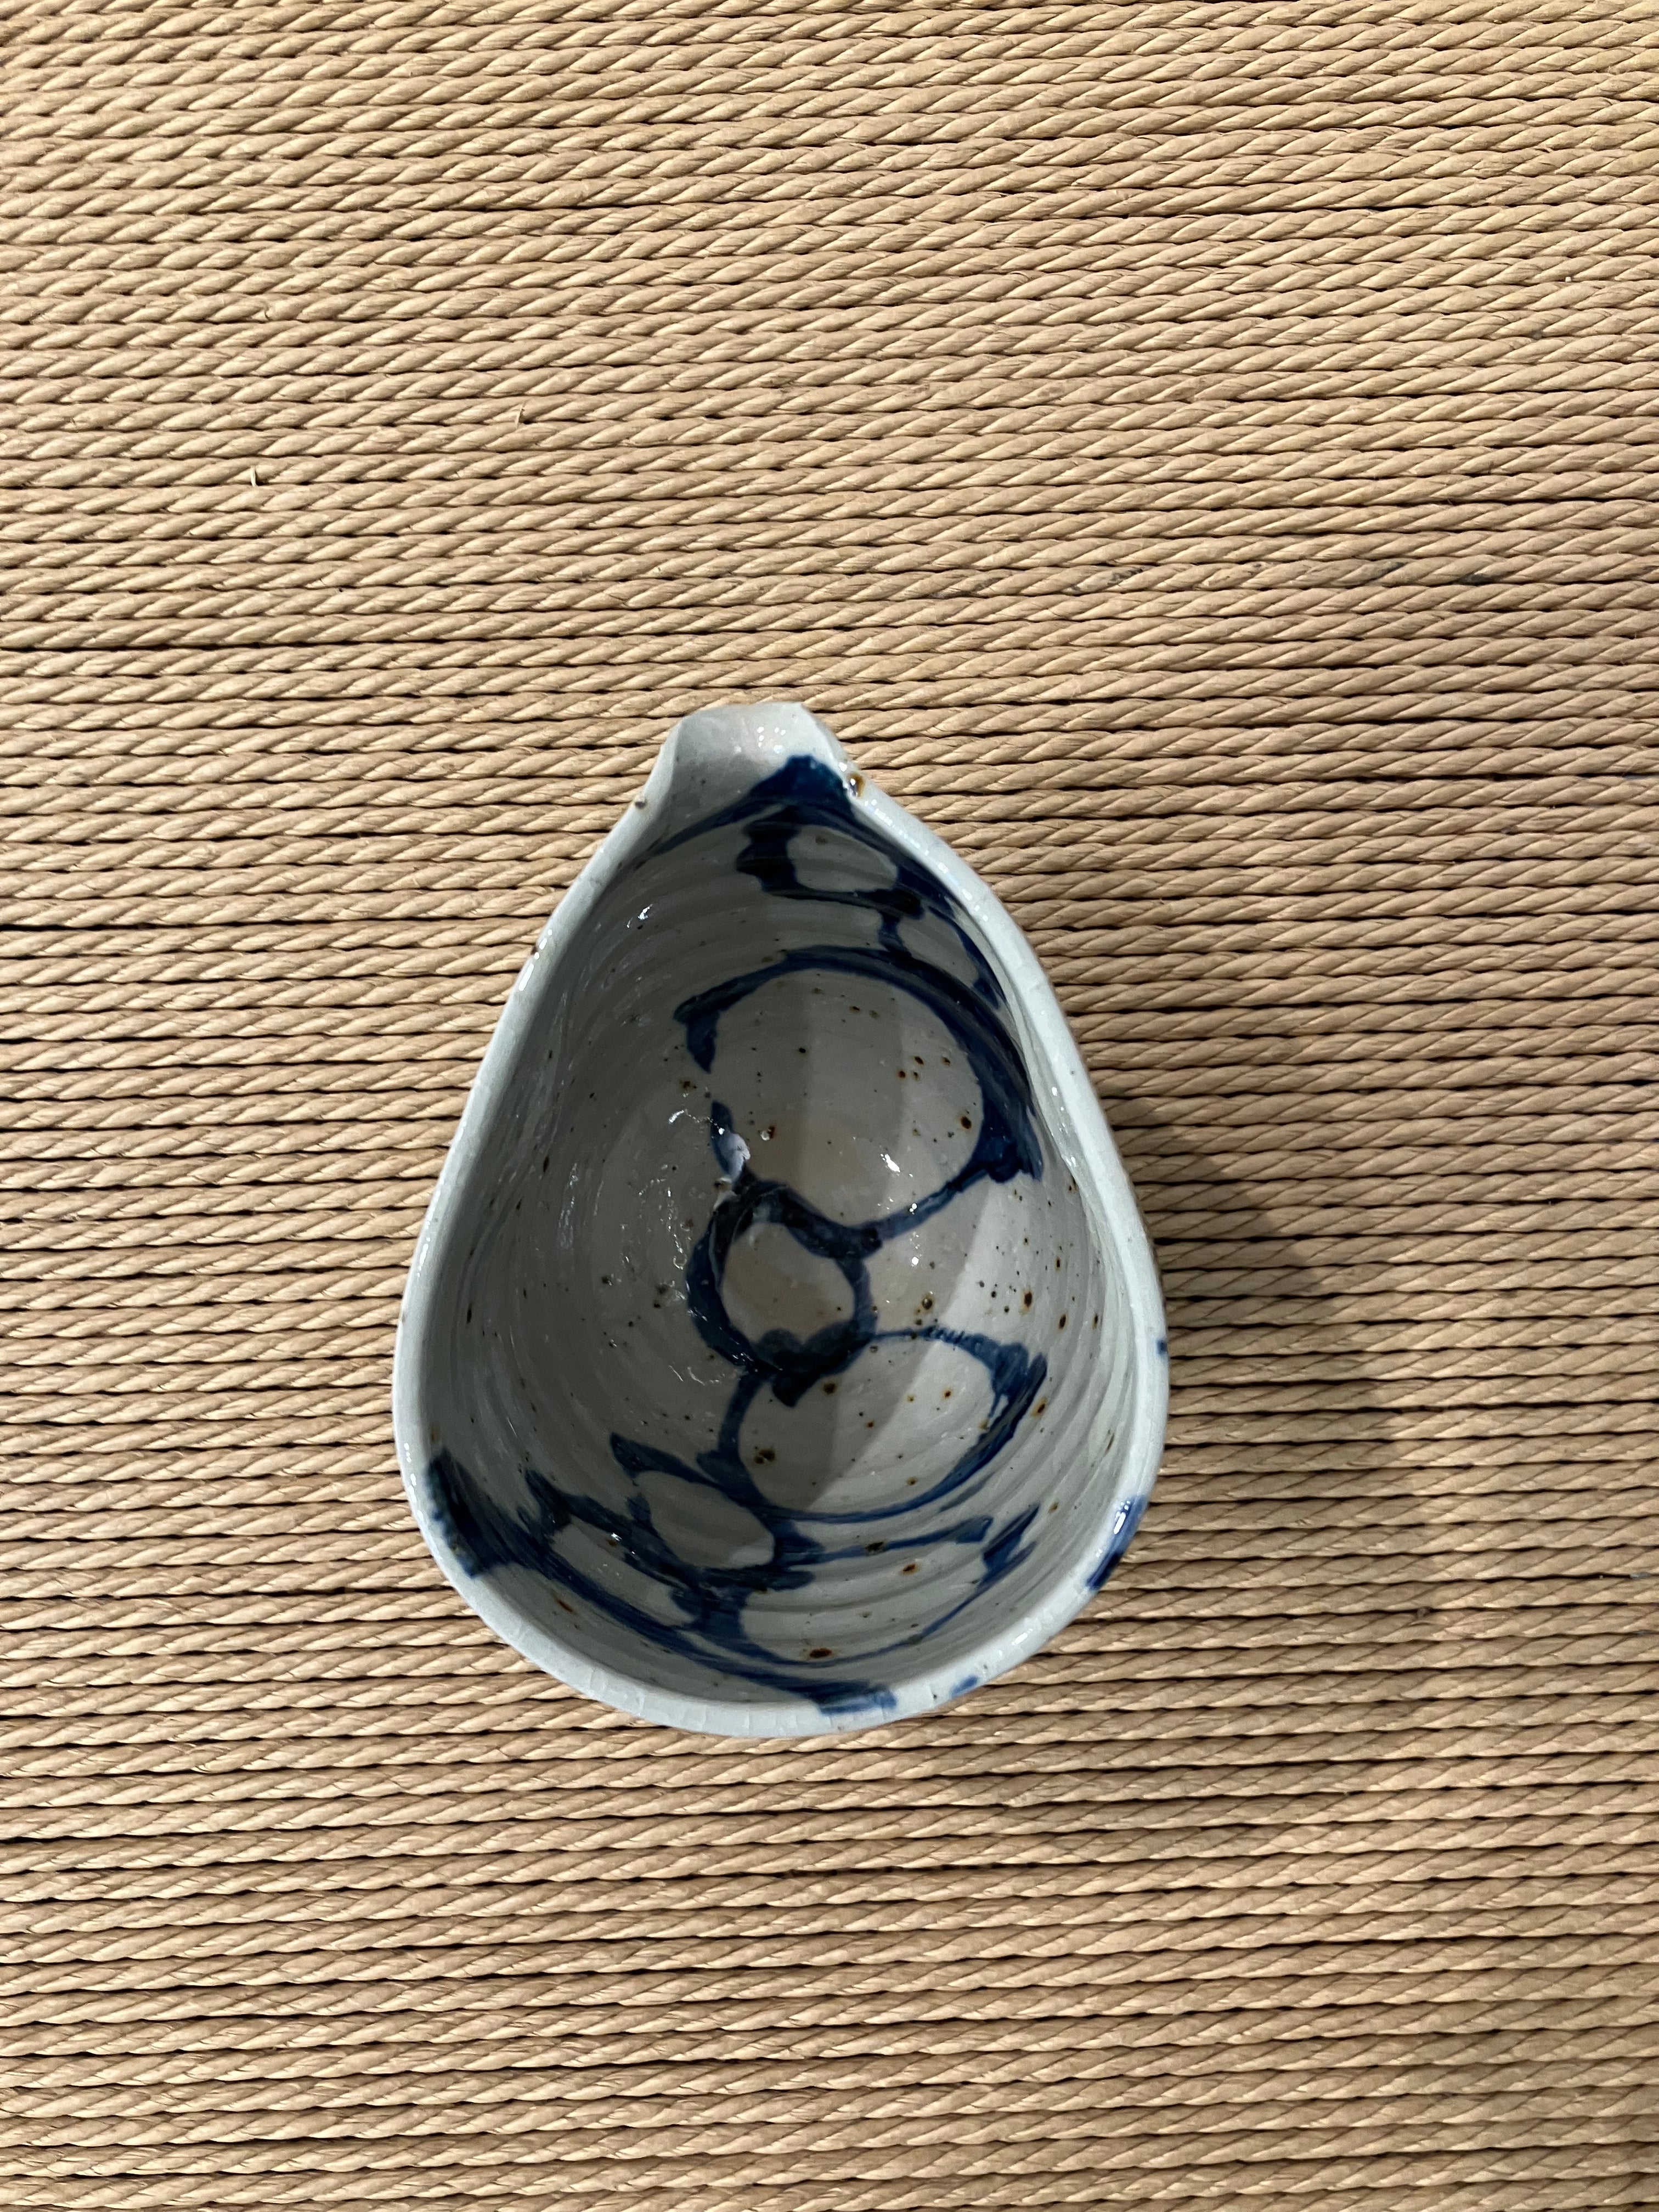 Ceramic jug in an organic shape with a blue pattern